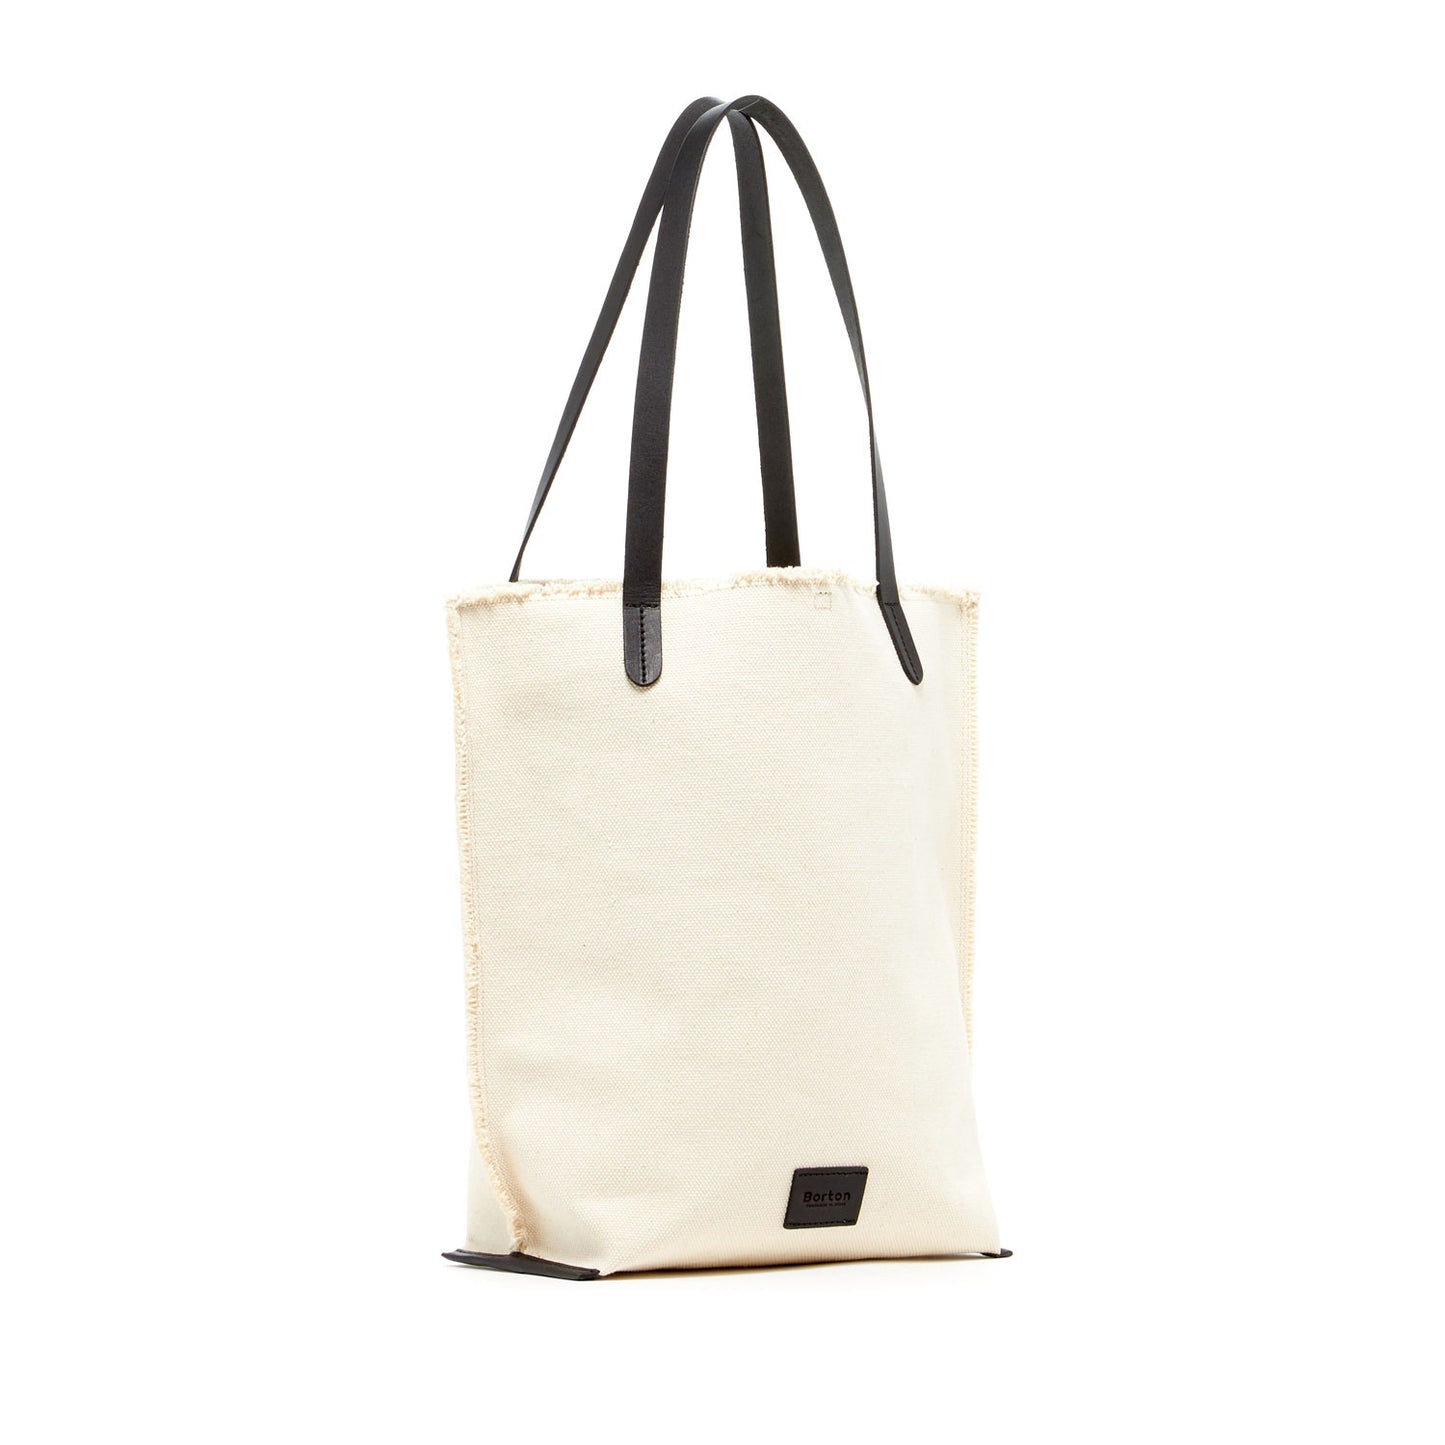 Mery Tote Bag Natural Canvas & Black Leather